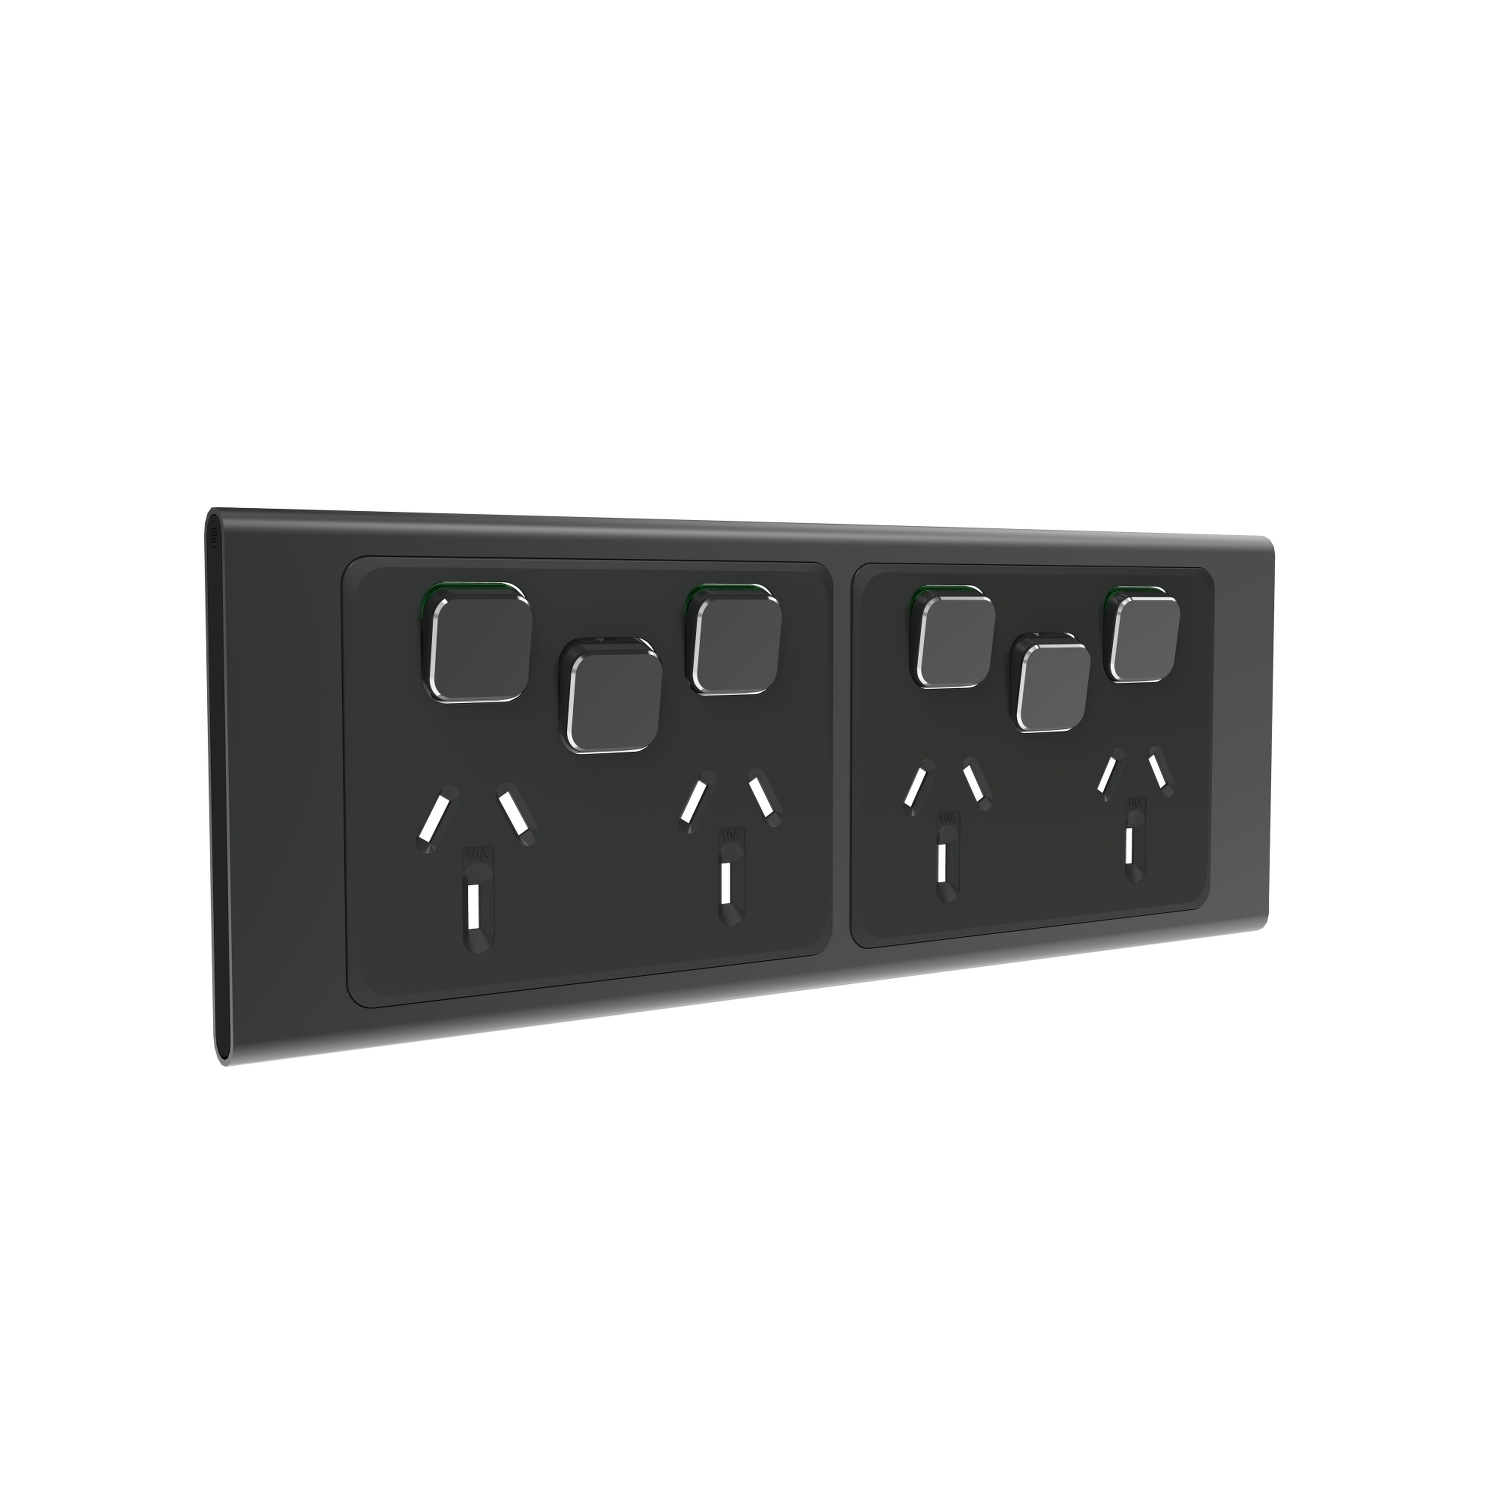 PDL Iconic Styl, cover frame, 6 switches & 4 sockets, horizontal - Silver Shadow